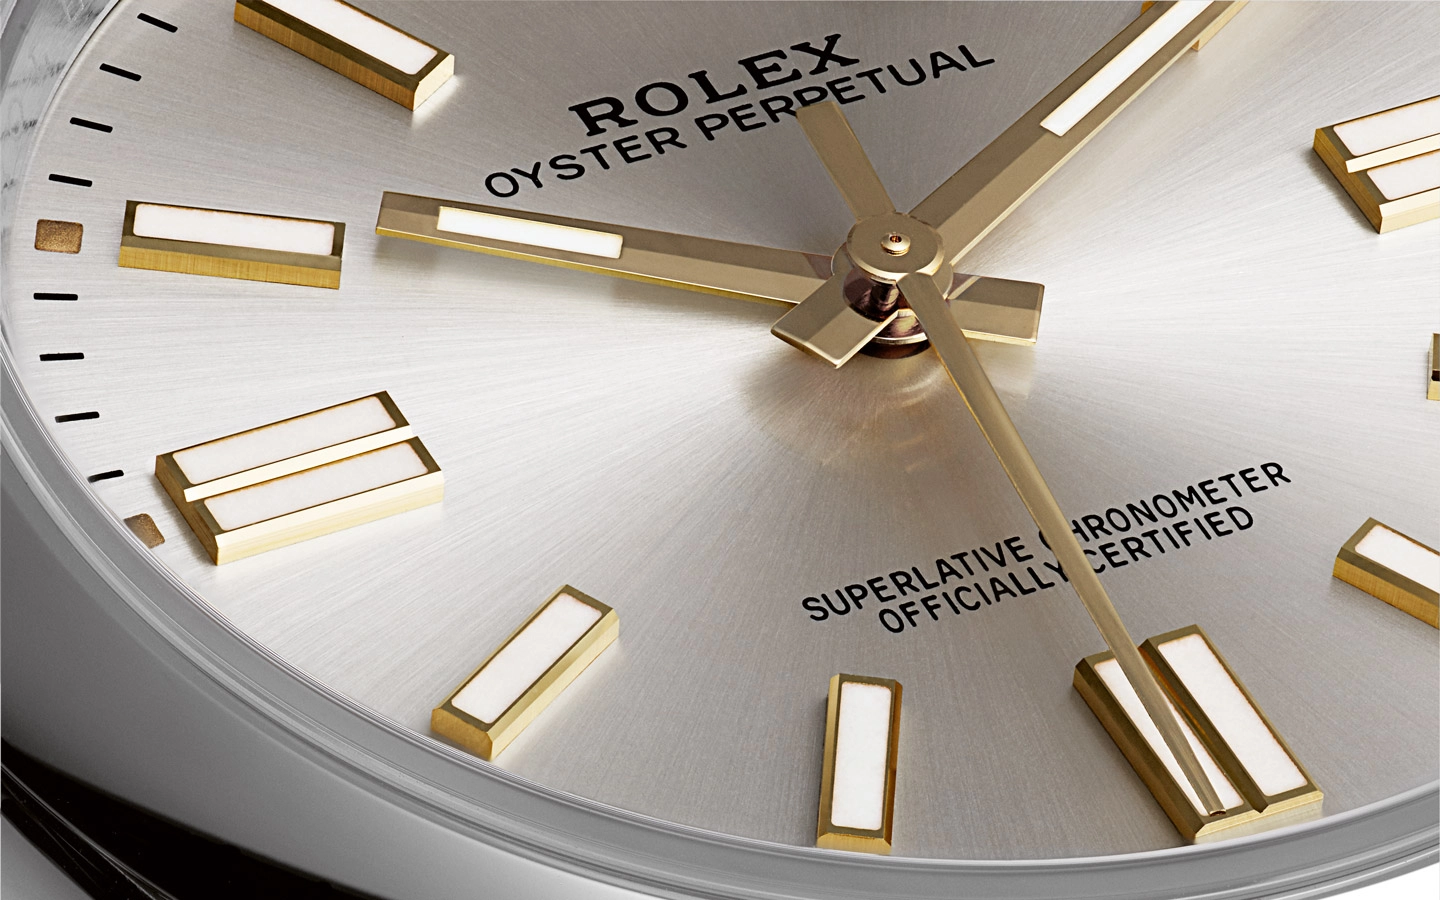 08 Oyster Perpetual The Essence Of The Oyster Two Column 02 Desktop 1440x900 Copy